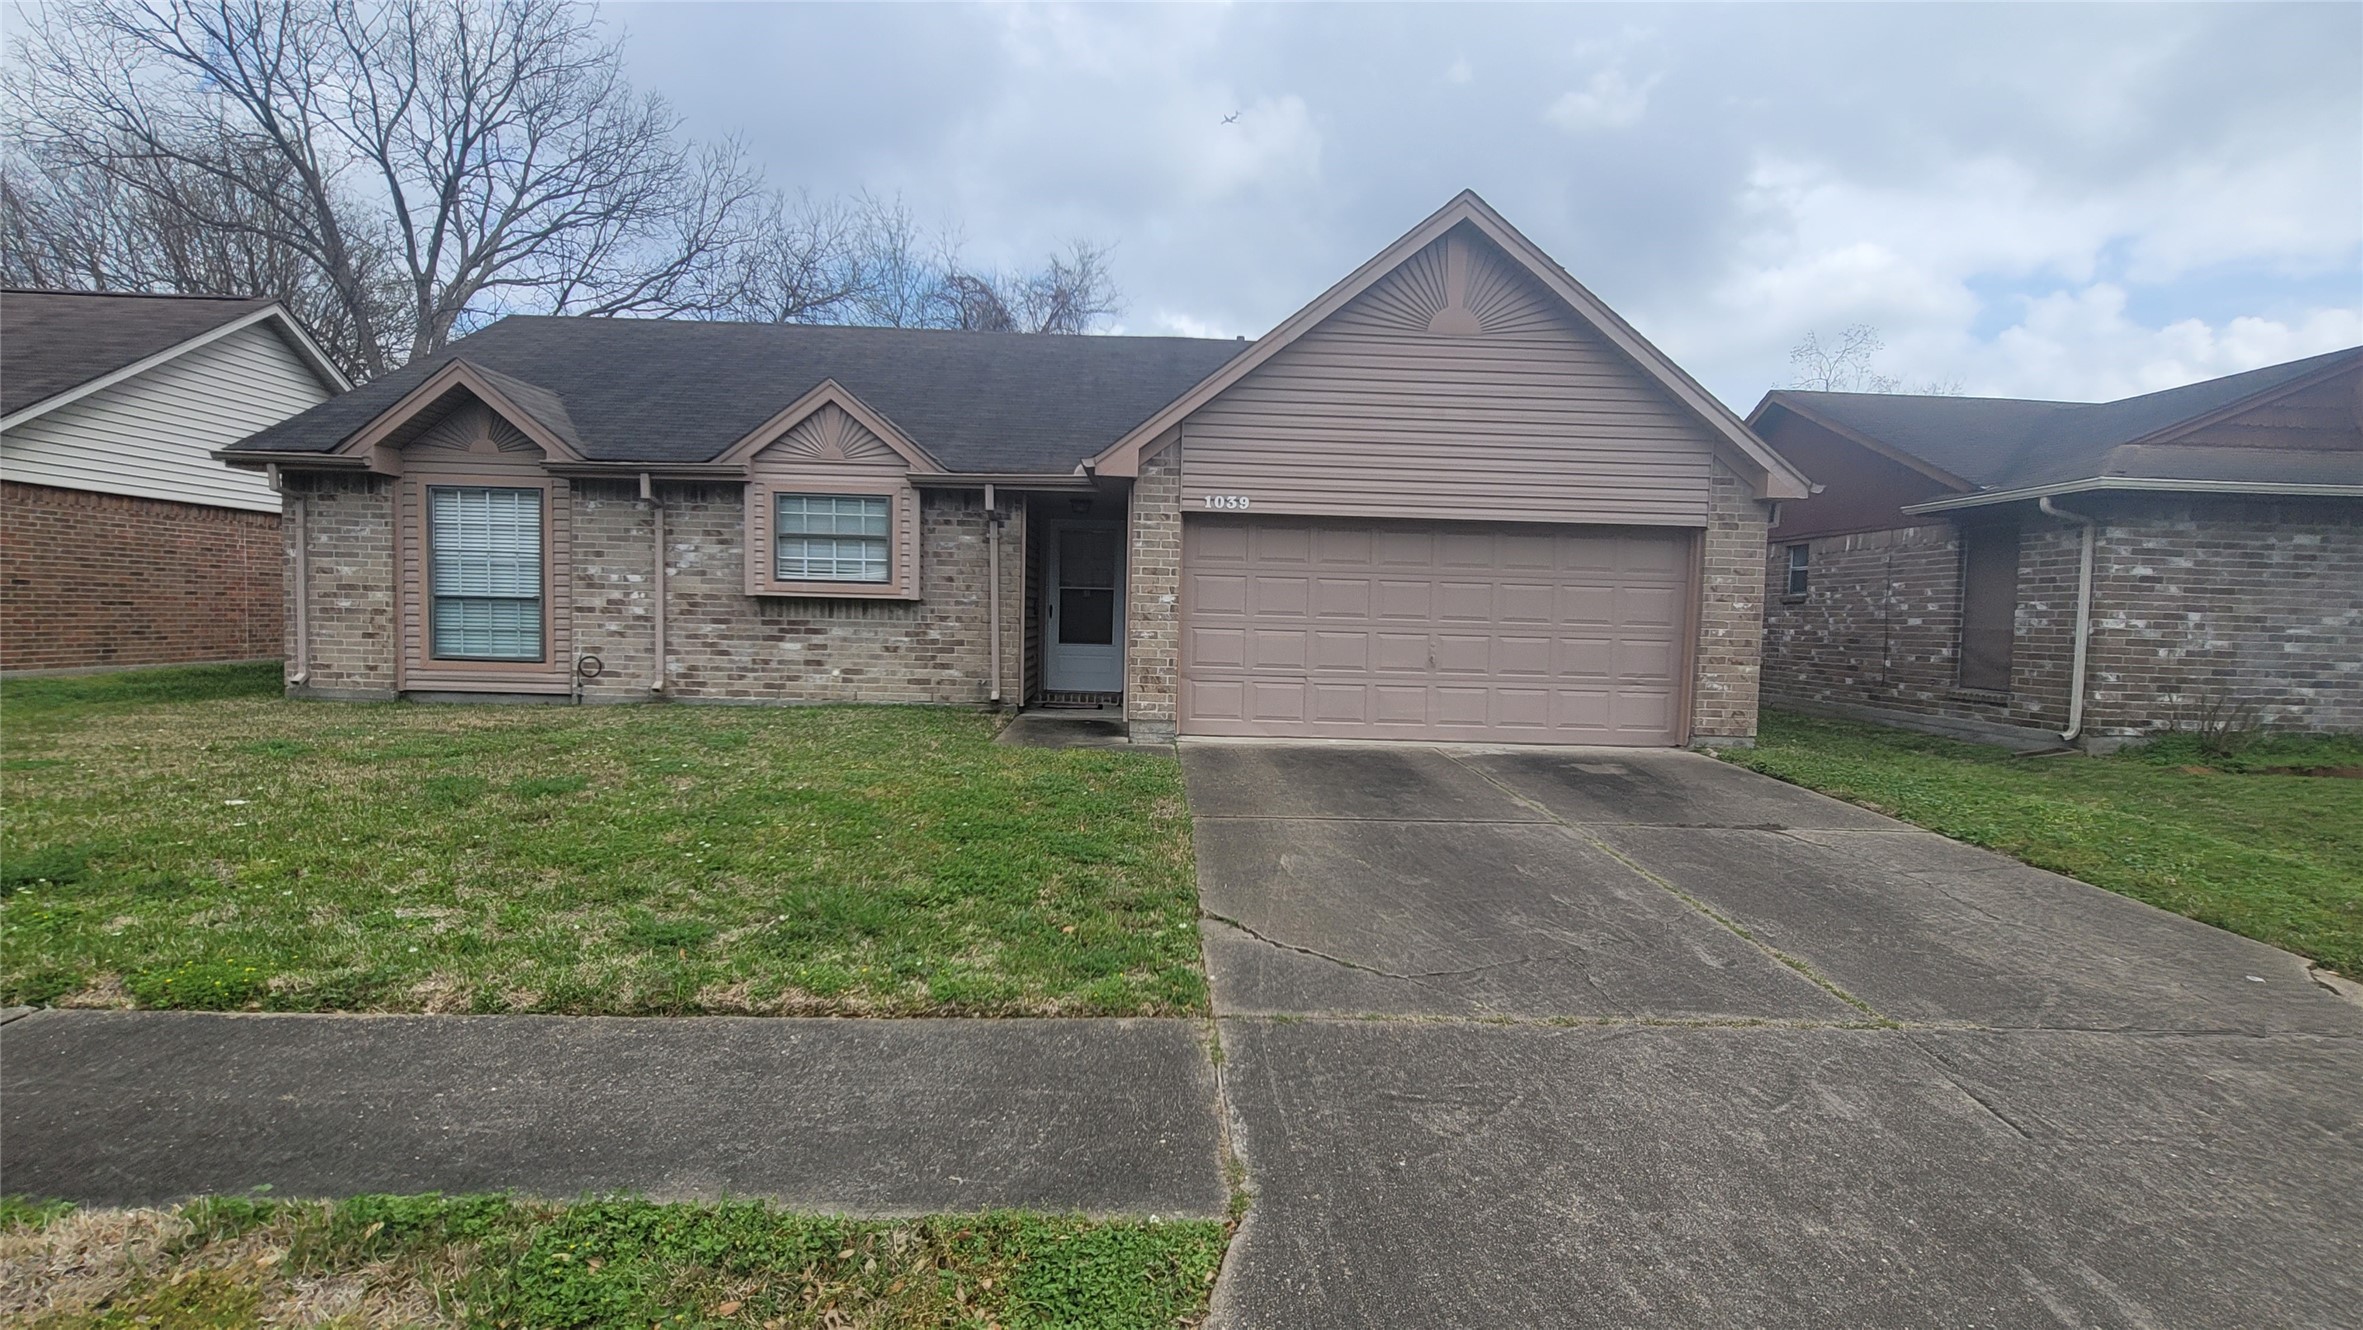 Pearland 1-story, 3-bed 1039 Oxford Drive-idx